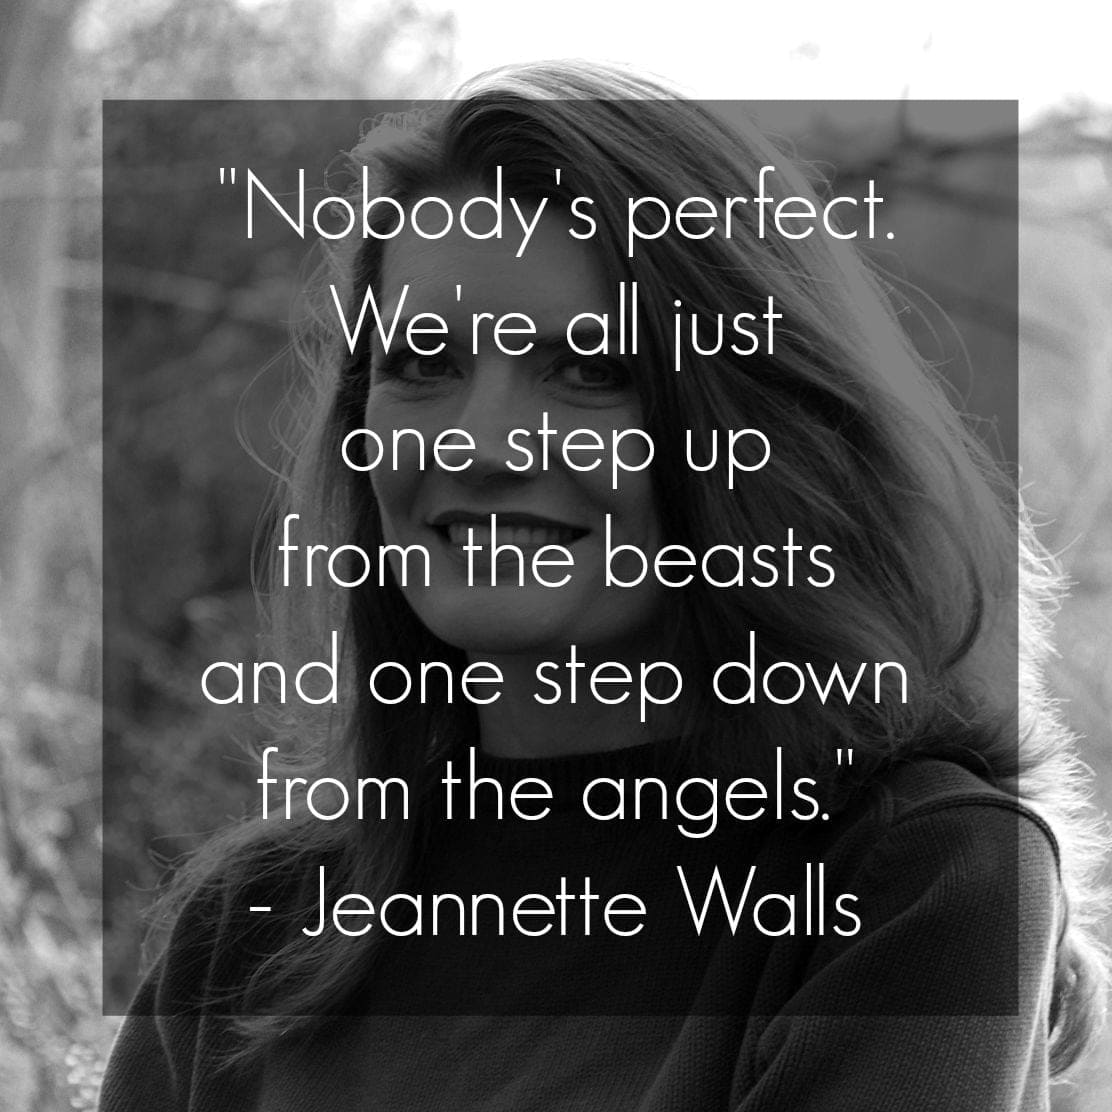 jeannette walls quote nobodys perfect were all just one step up from the beasts and one step down from the angels